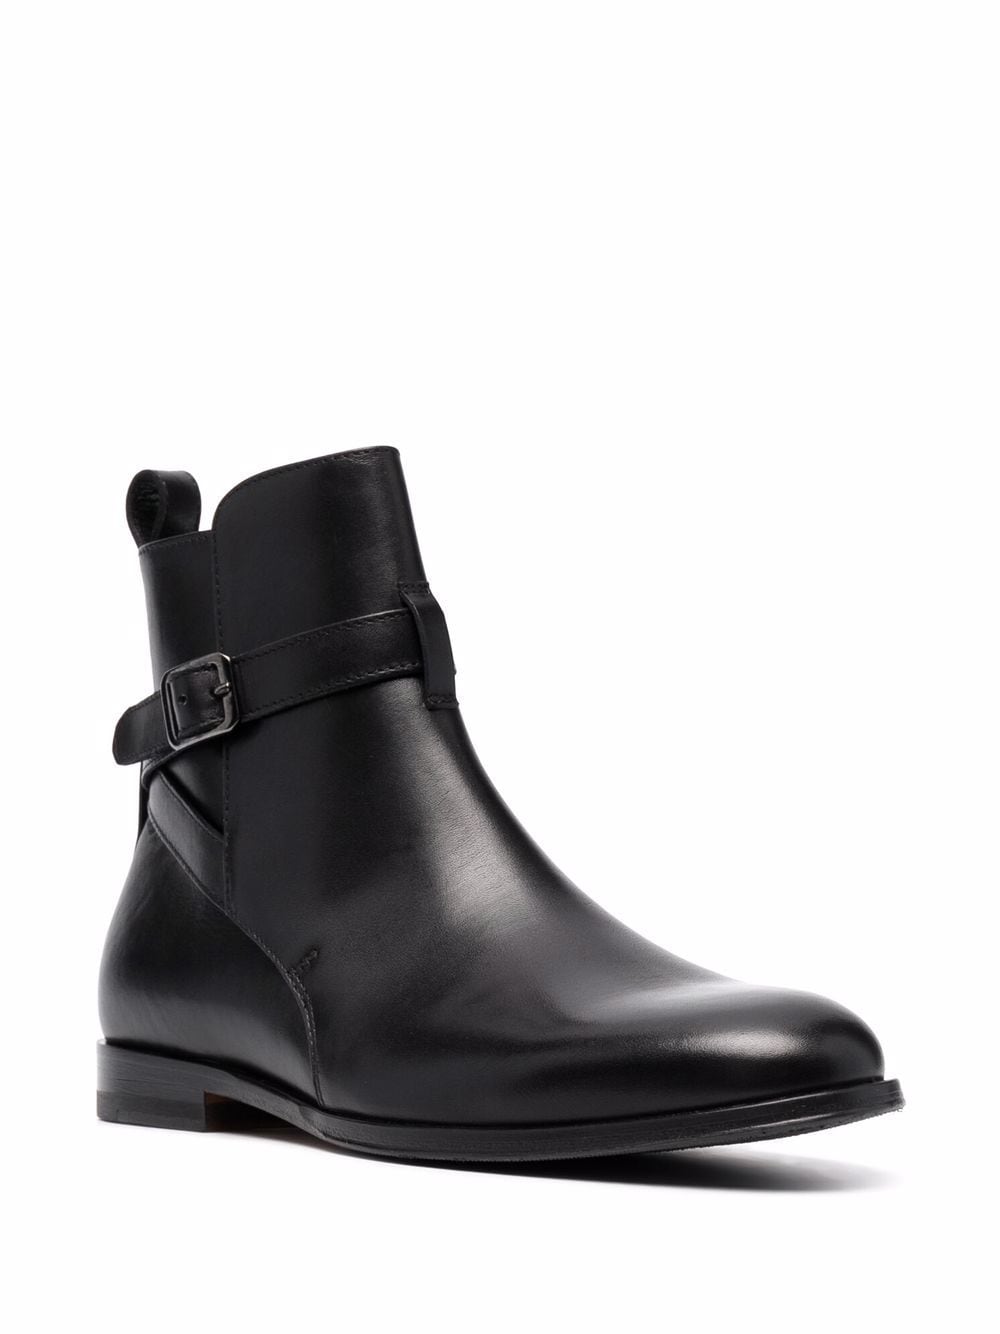 Scarosso Lara Buckled Ankle Boots - Farfetch